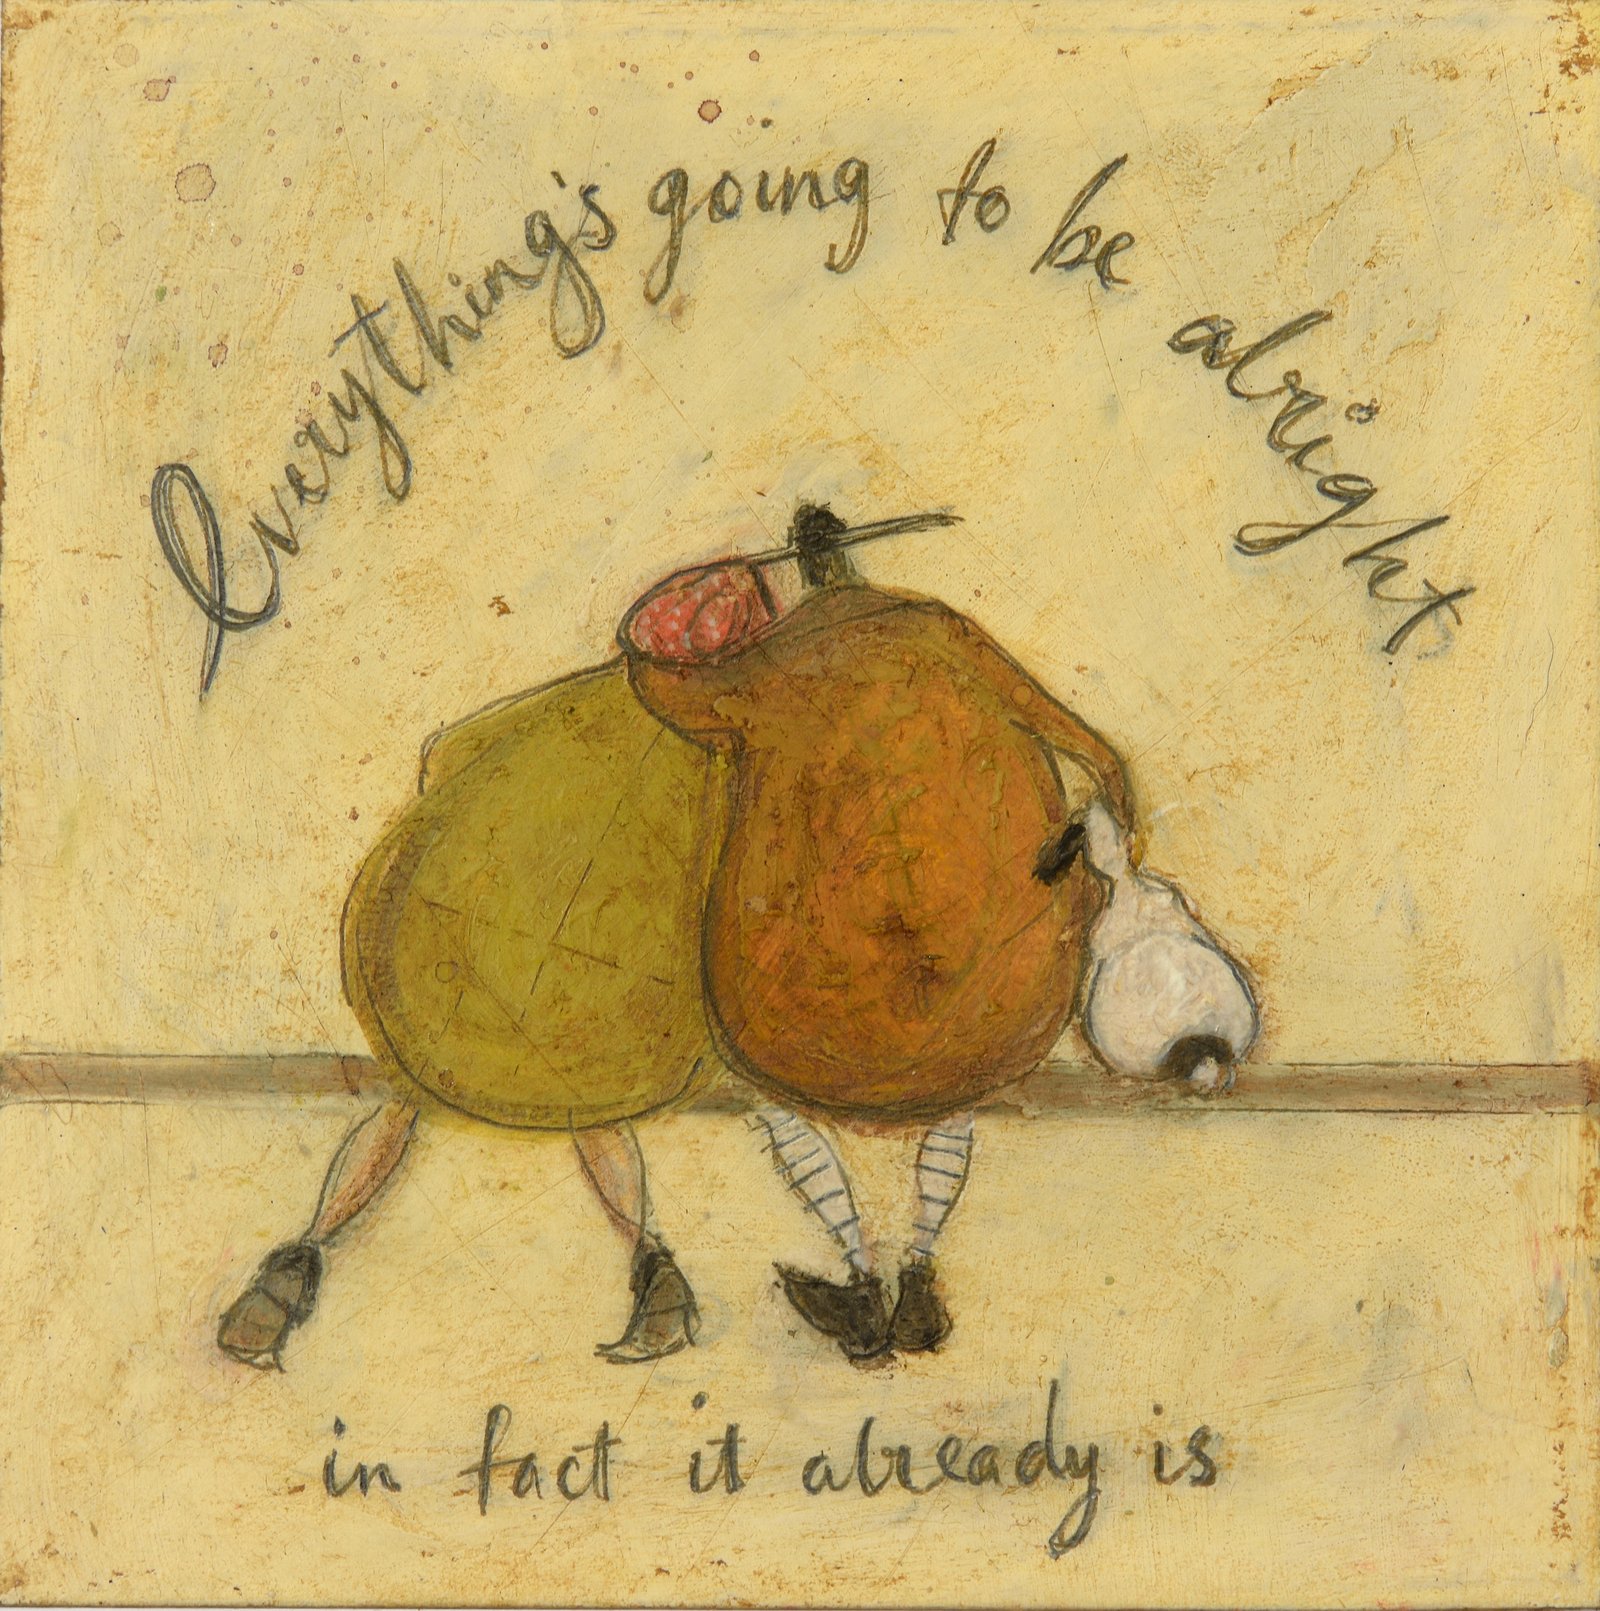 Everything’s going to be alright. In fact it already is. – Sam Toft ...